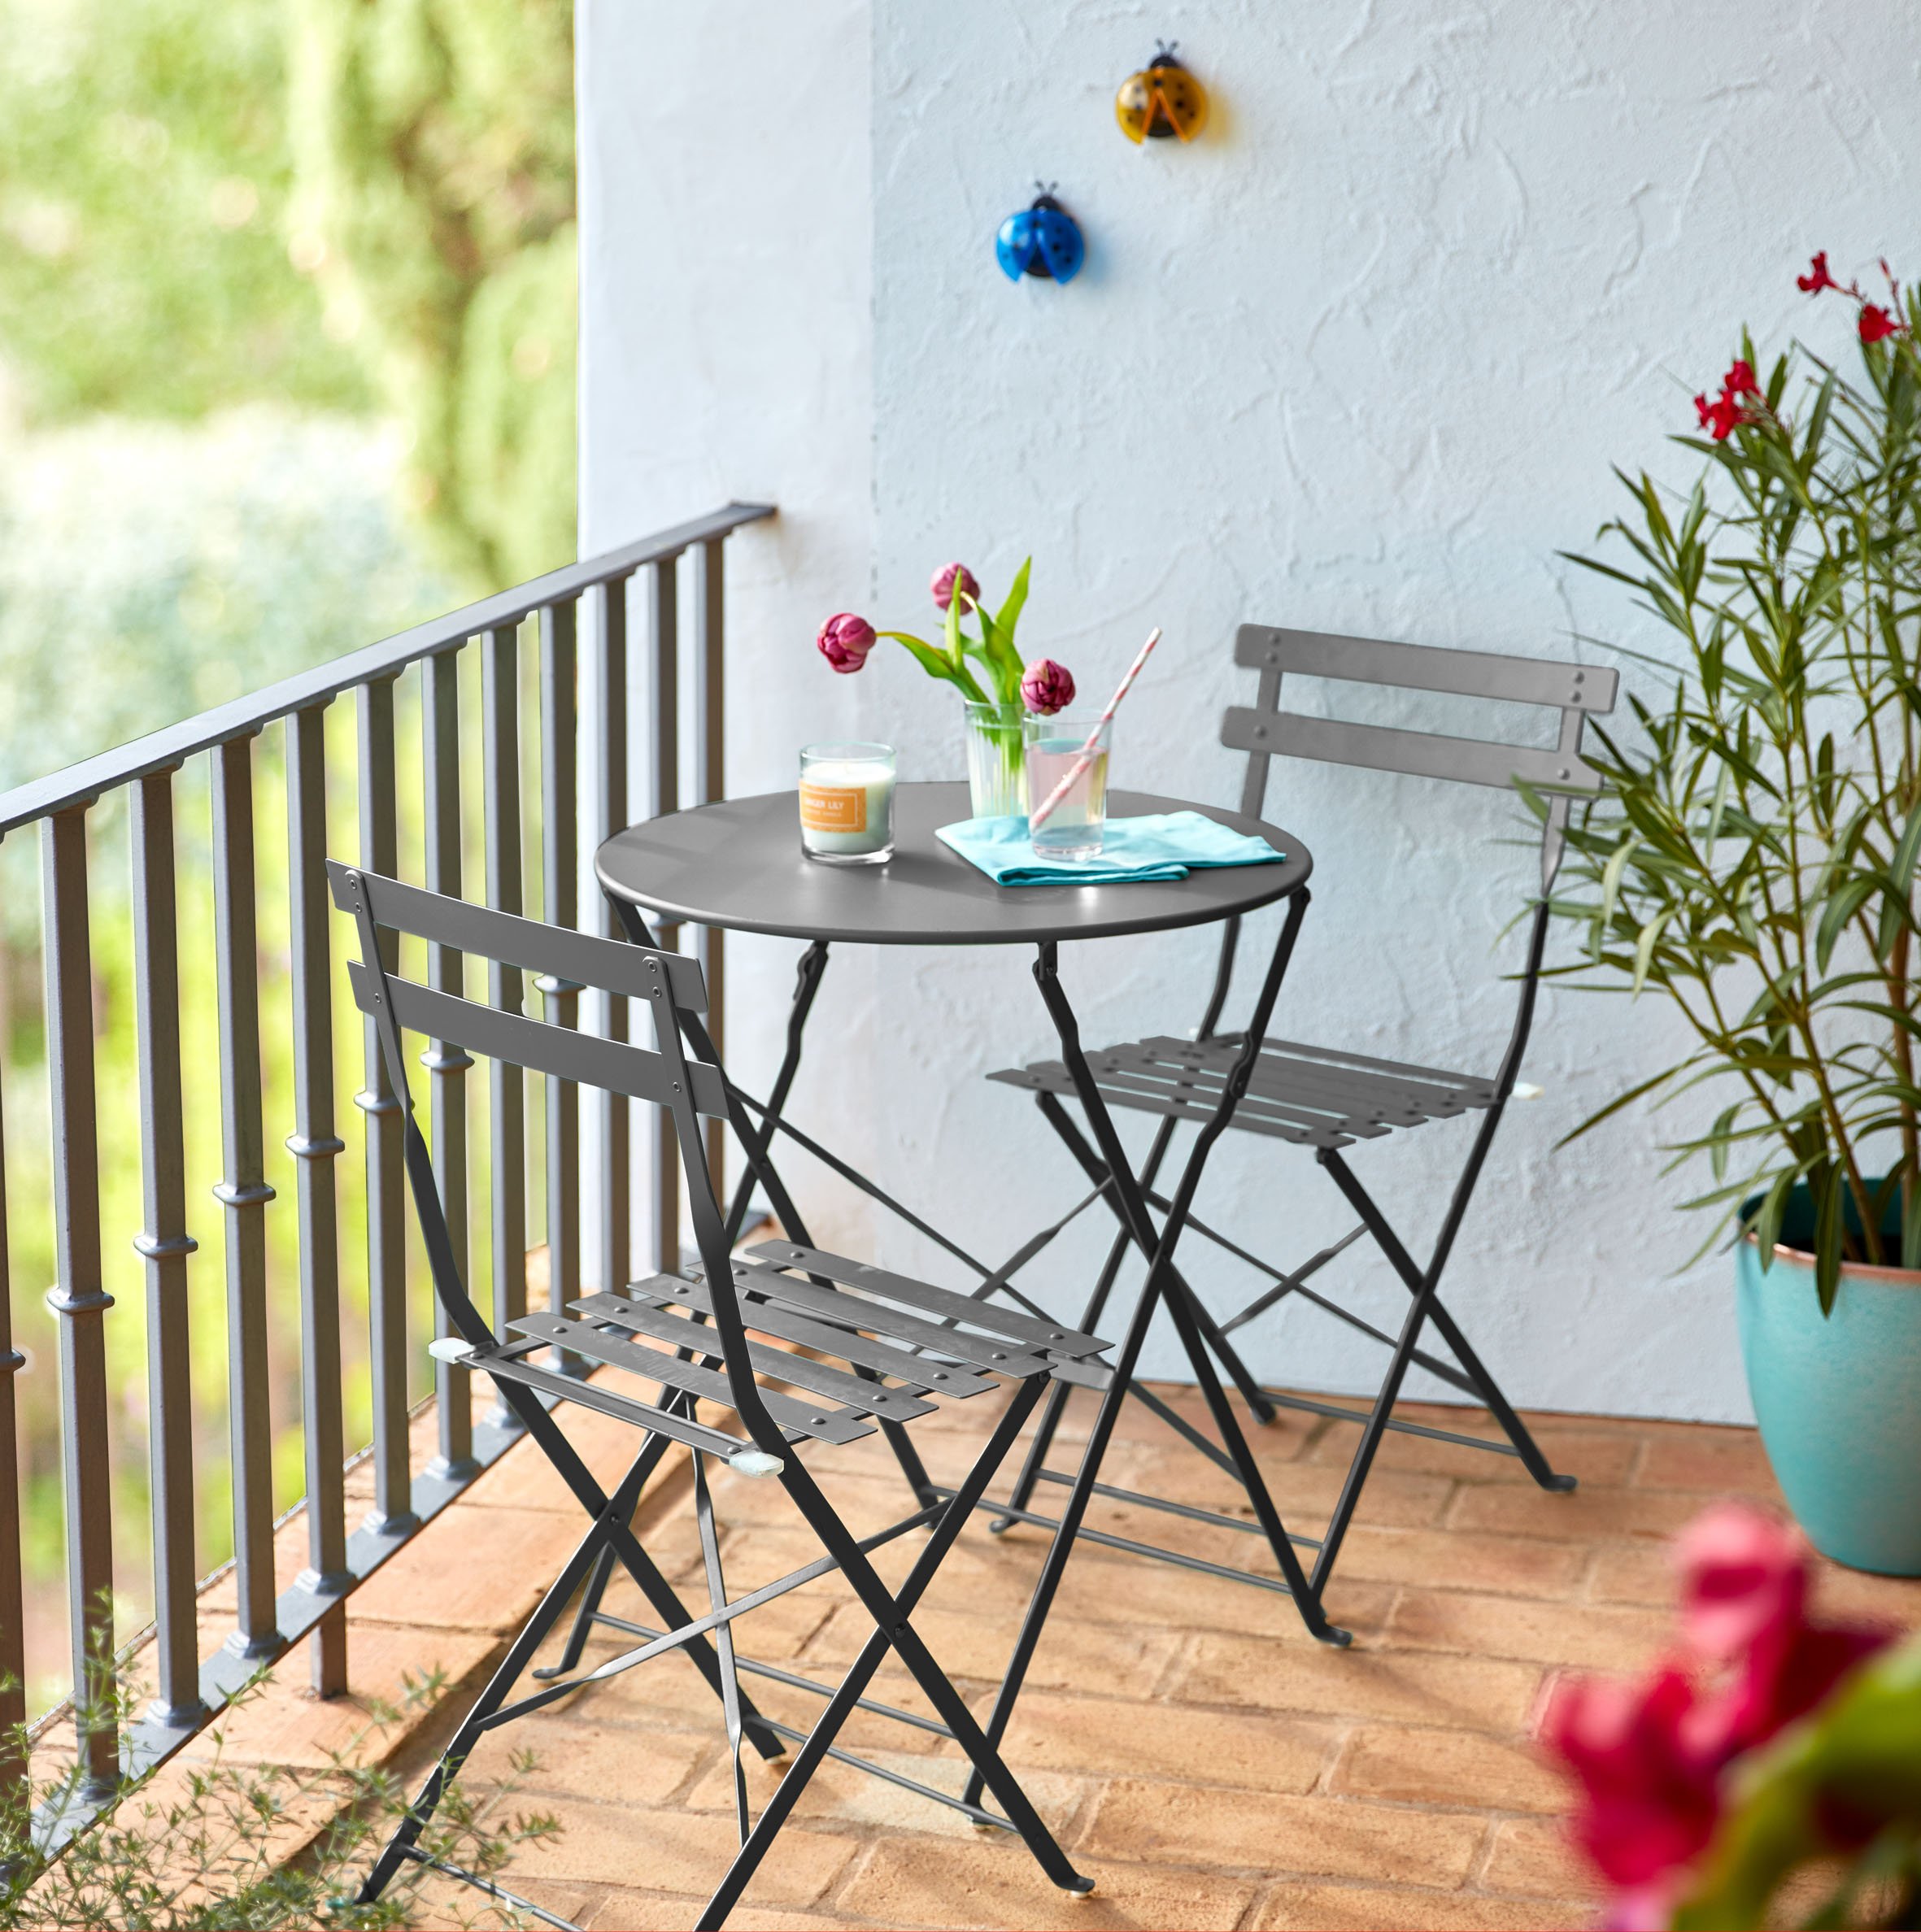 Our balcony garden ideas allow you to enjoy nature in a small space